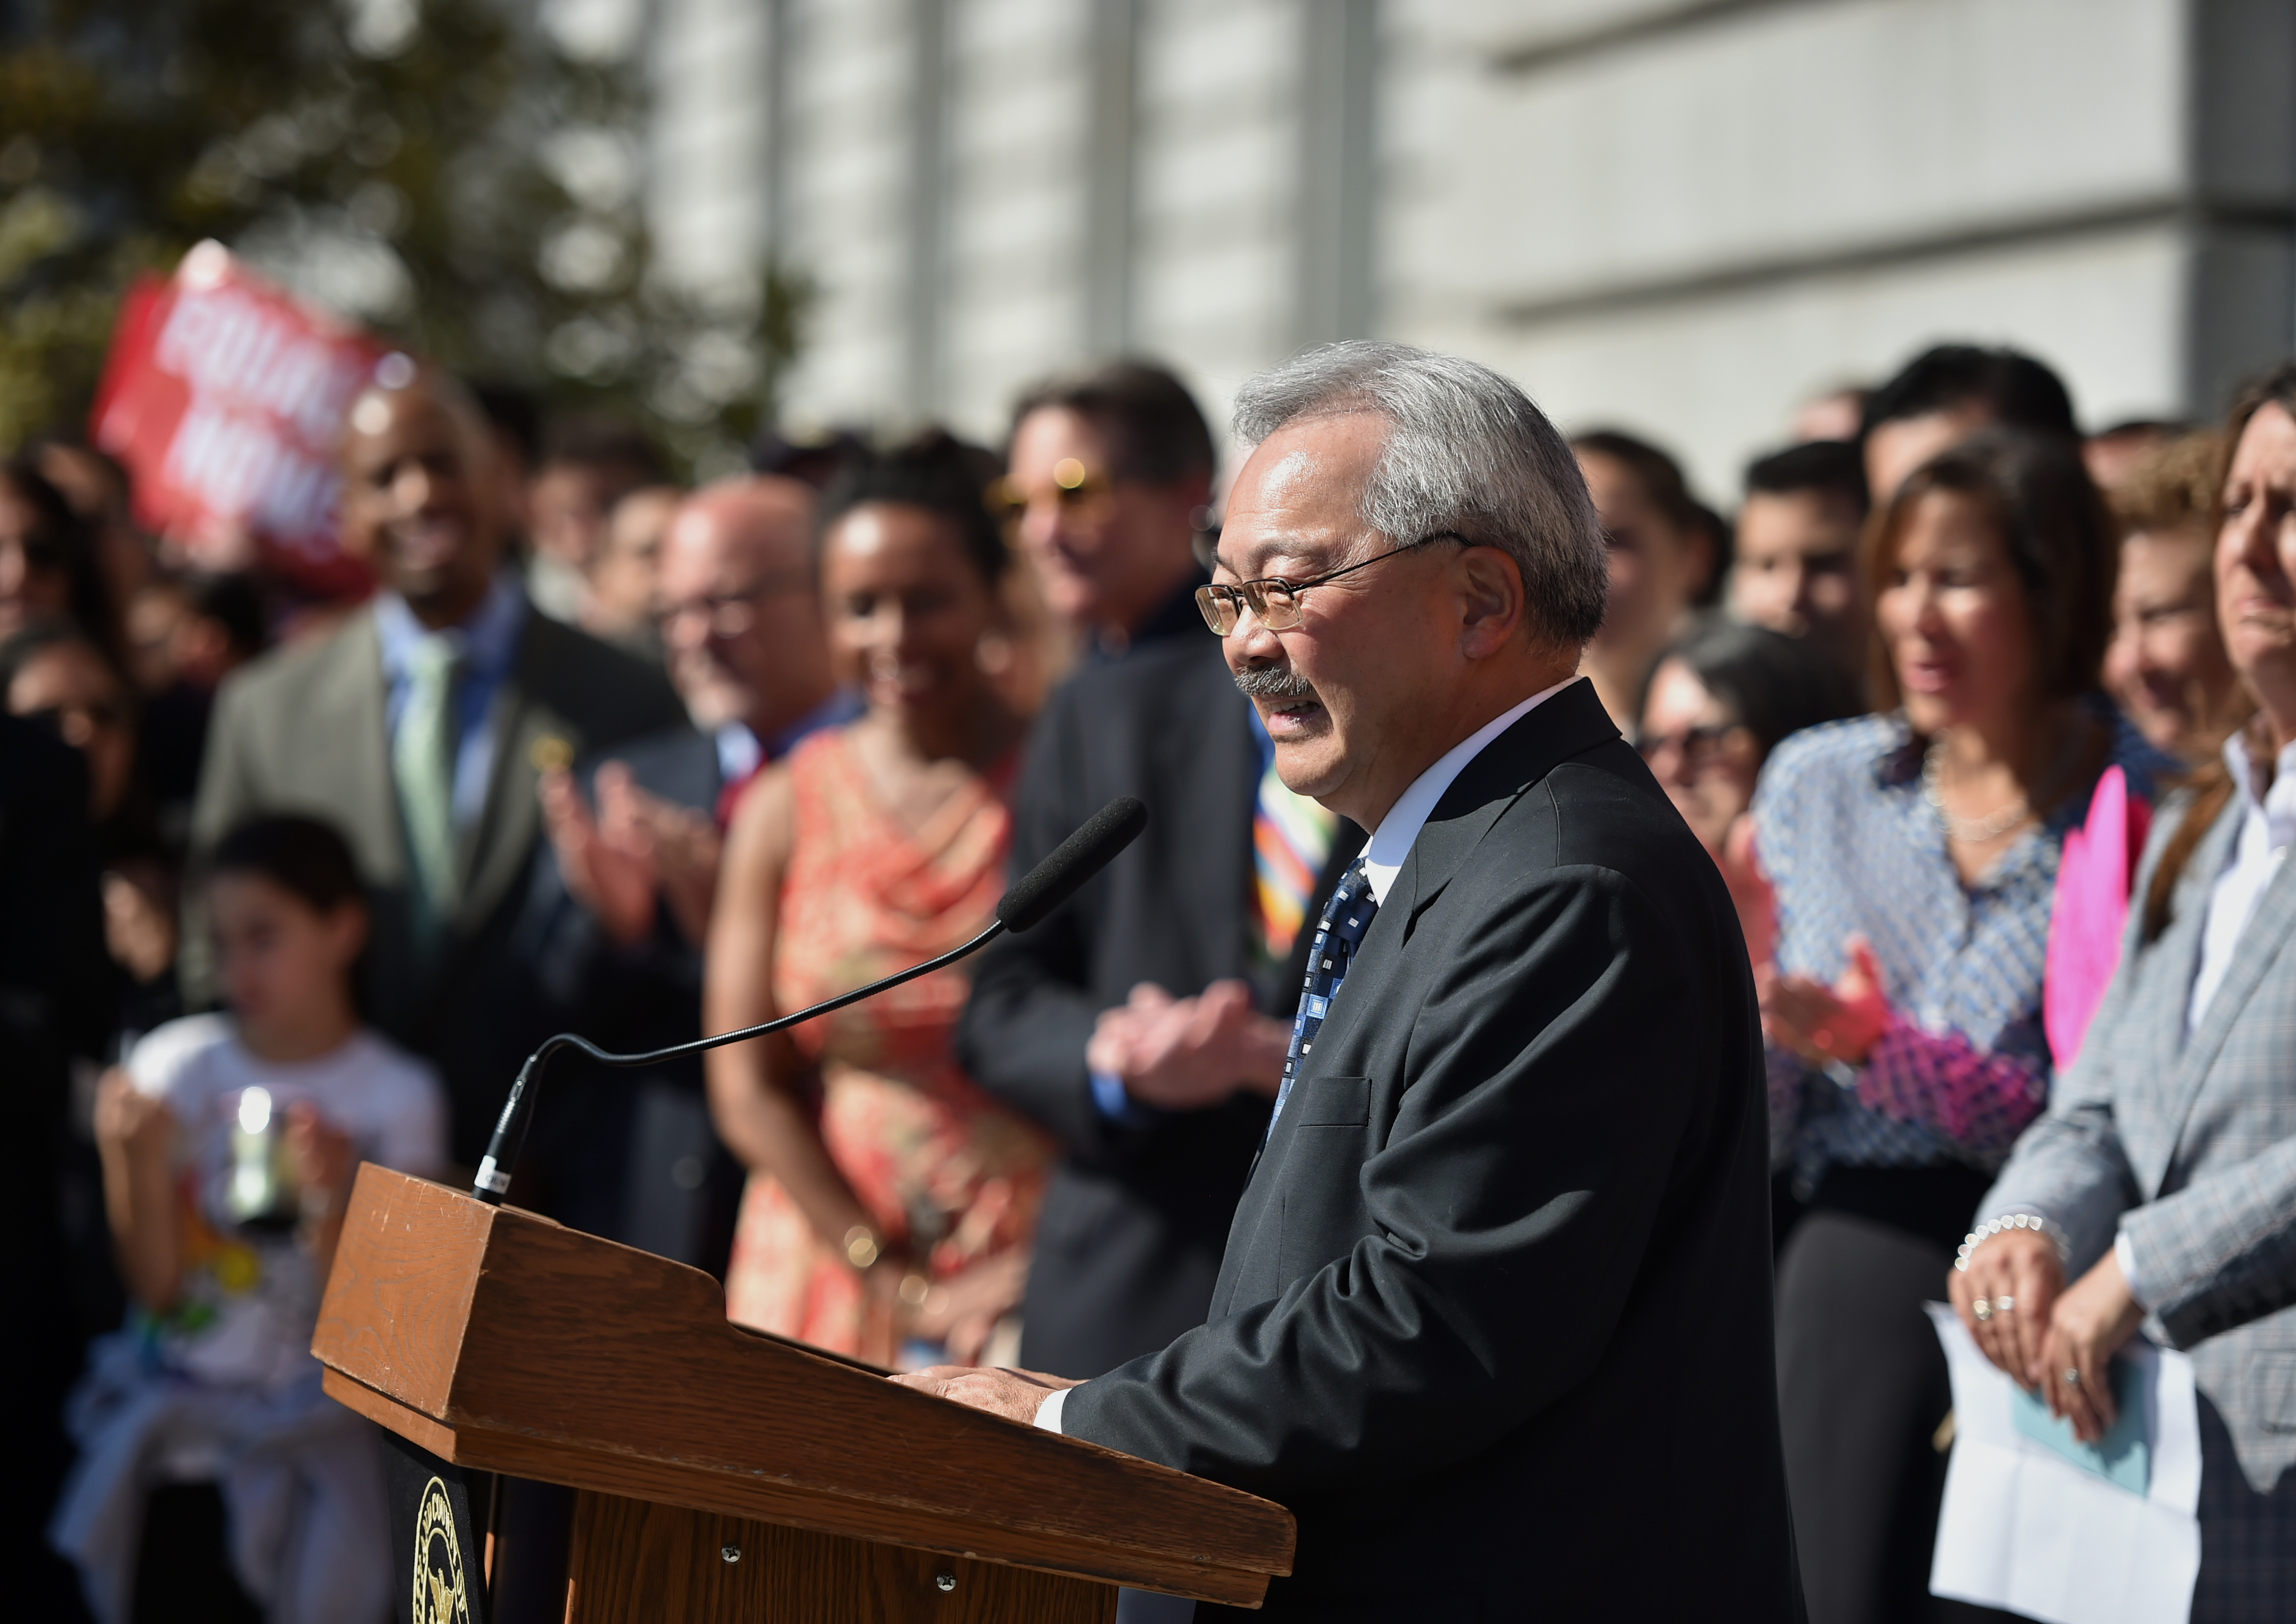 Ed Lee, mayor of San Francisco, speaks during a news conference outside City Hall after the U.S. Supreme Court same-sex marriage ruling in San Francisco, California, U.S., on Friday, June 26, 2015. Same-sex couples have a constitutional right to marry nationwide, the U.S. Supreme Court said in a historic ruling that caps the biggest civil rights transformation in a half-century. Photographer: Josh Edelson/Bloomberg via Getty Images (Bloomberg—Bloomberg via Getty Images)